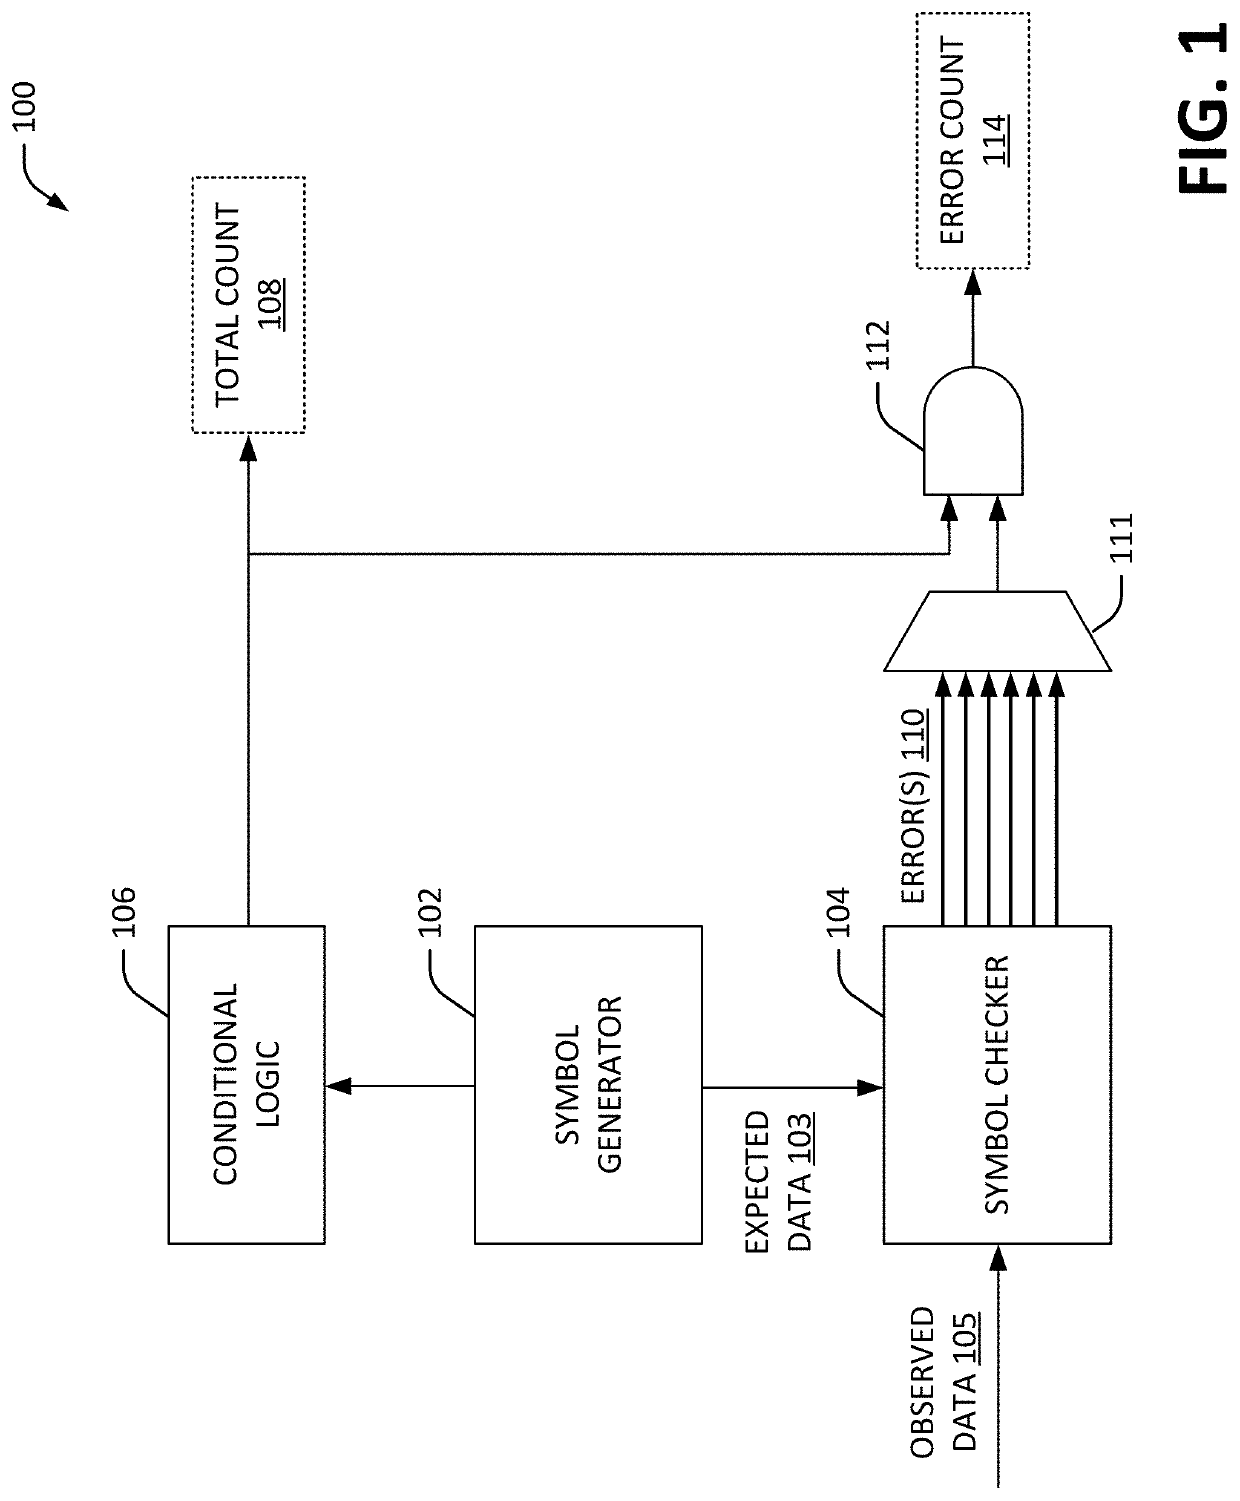 Method and apparatus for symbol-error-rate (SER) based tuning of transmitters and receivers